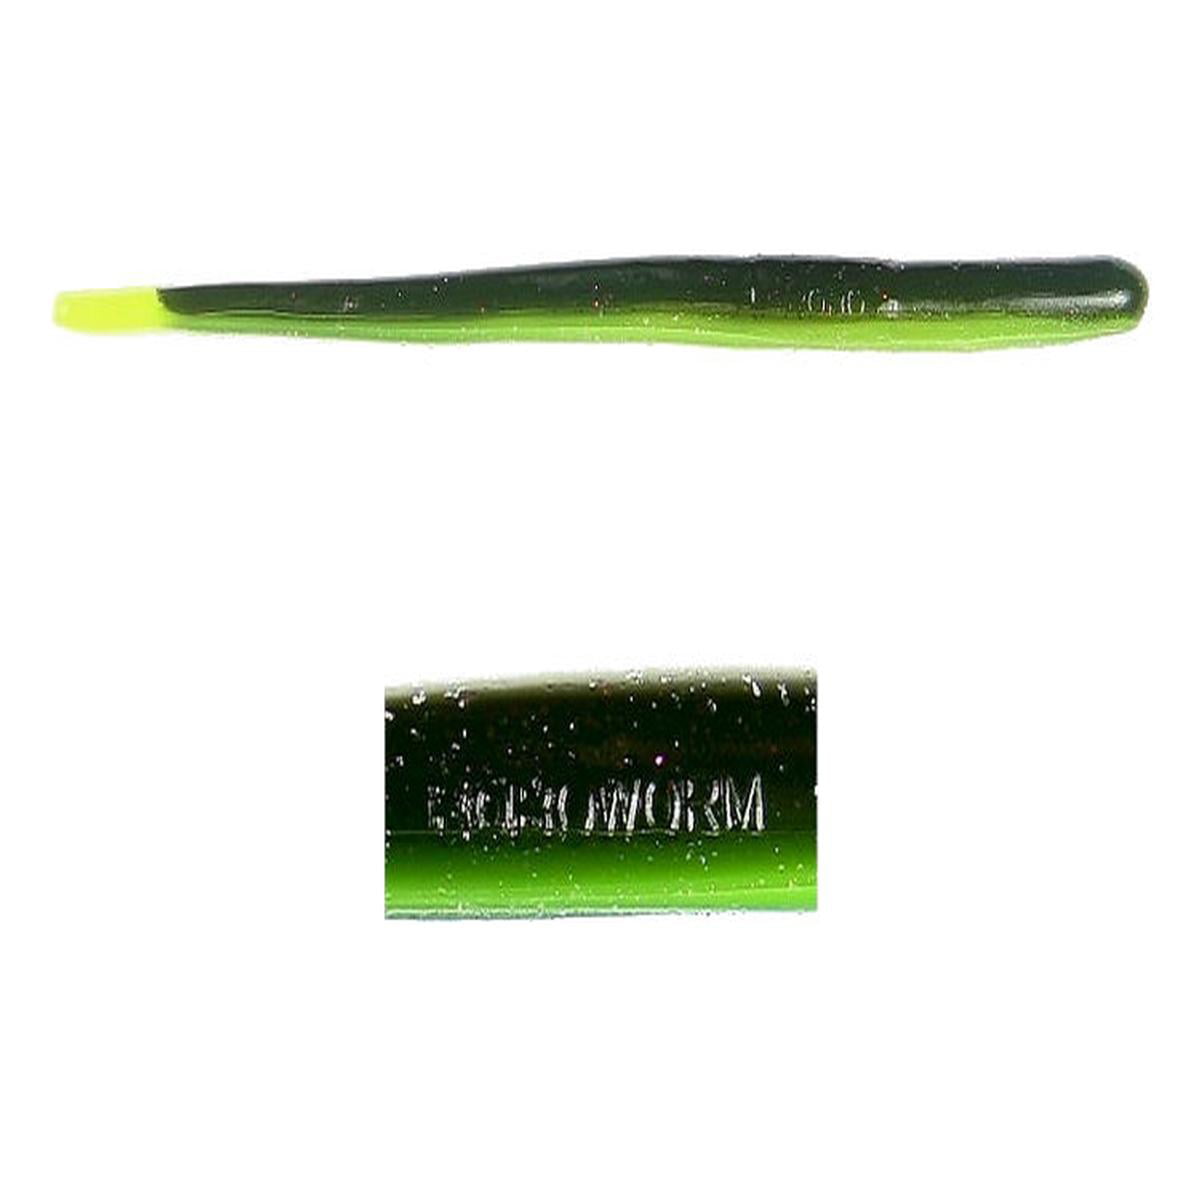 Zoom Lizard Fishing Bait, Cotton Candy Chartreuse, 6”, 9-pack, Soft Baits